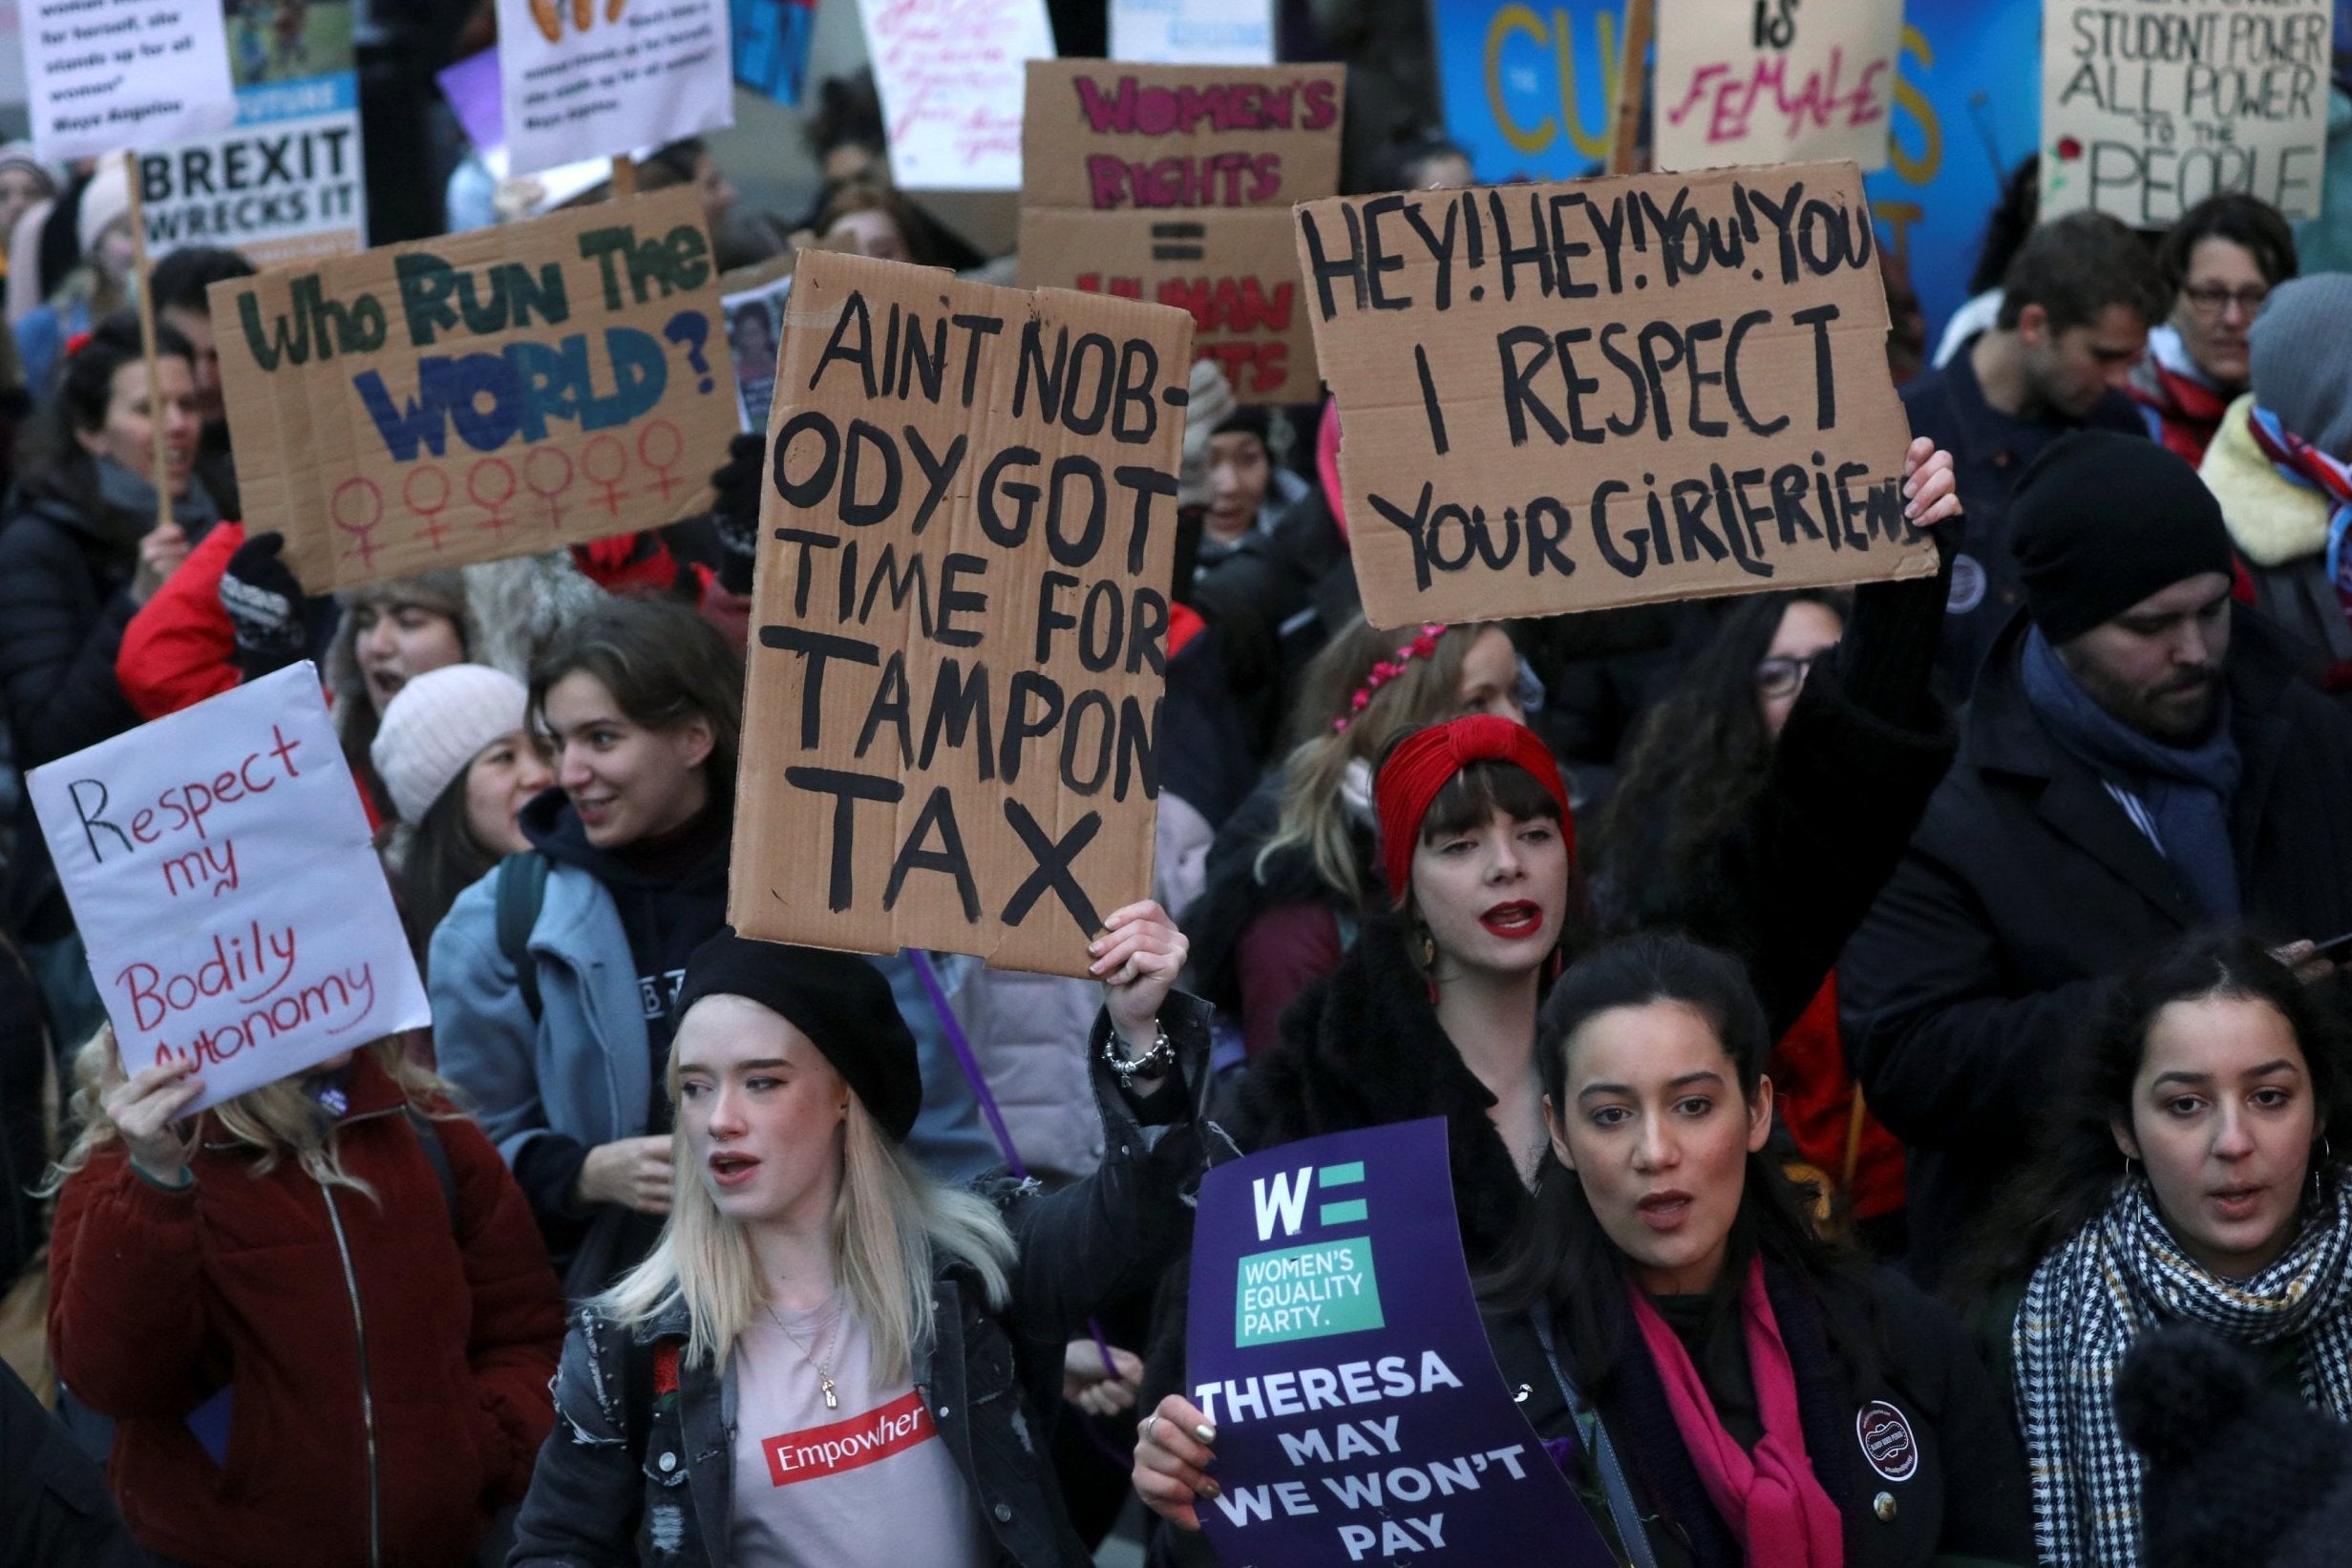 Today, despite the march, I will still be faced with the same sexism I do every other day